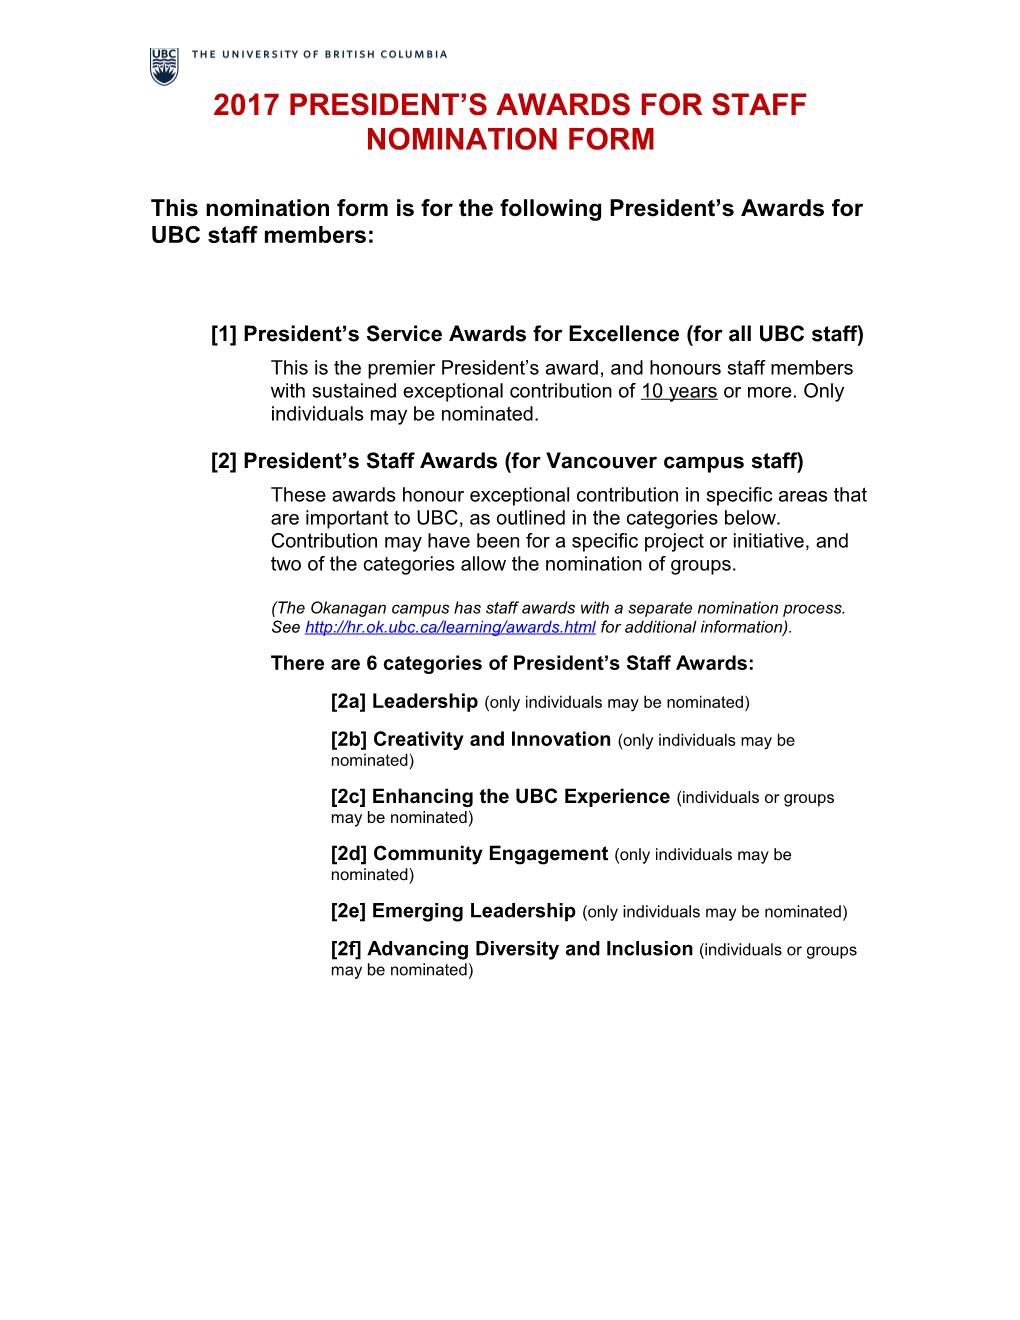 UBC President's Awards for Staff Nomination Form